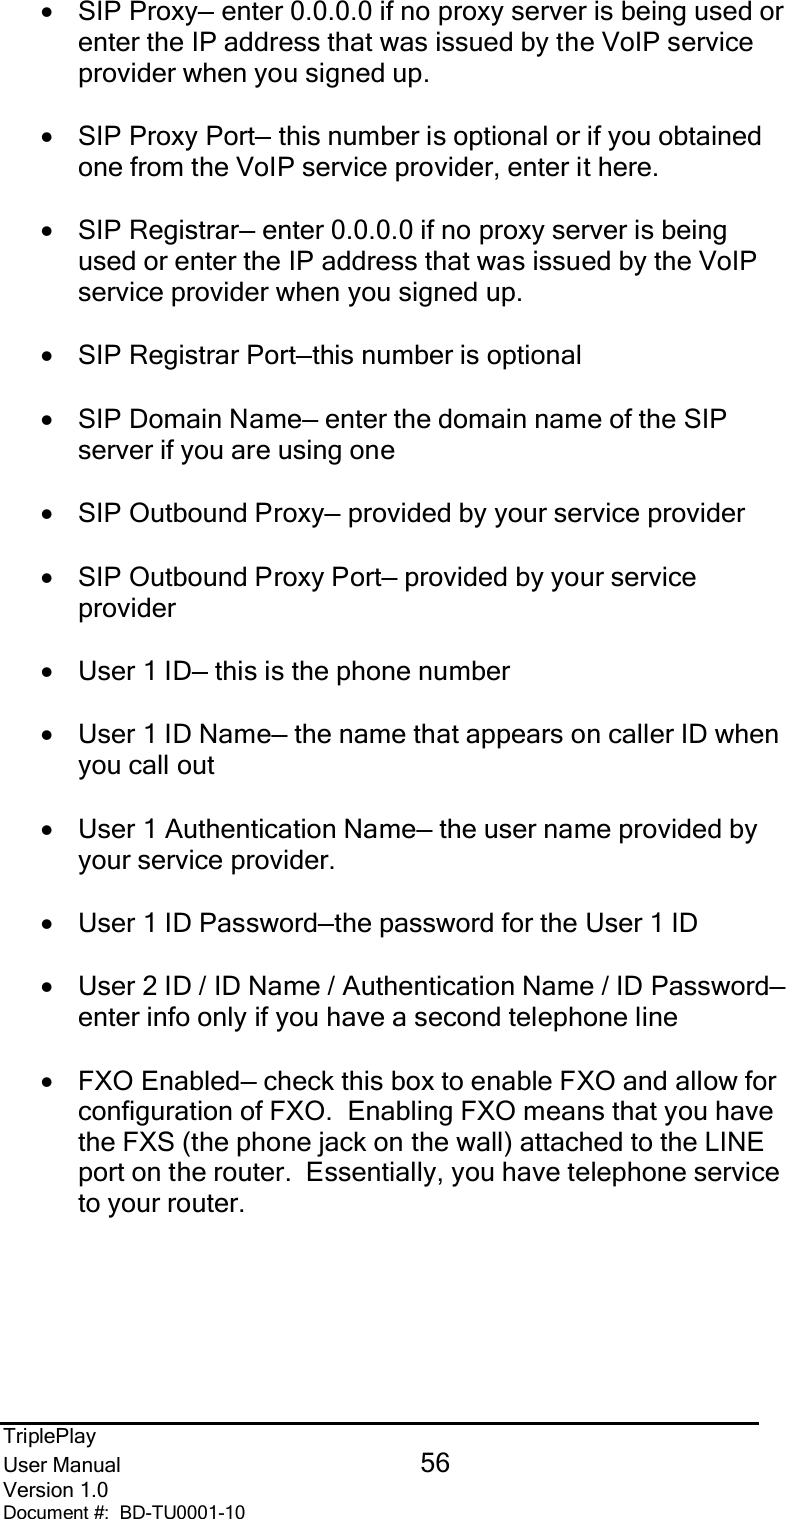 TriplePlayUser Manual 56Version 1.0Document #:  BD-TU0001-10•SIP Proxy— enter 0.0.0.0 if no proxy server is being used orenter the IP address that was issued by the VoIP serviceprovider when you signed up.•SIP Proxy Port— this number is optional or if you obtainedone from the VoIP service provider, enter it here.•SIP Registrar— enter 0.0.0.0 if no proxy server is beingused or enter the IP address that was issued by the VoIPservice provider when you signed up.•SIP Registrar Port—this number is optional•SIP Domain Name— enter the domain name of the SIPserver if you are using one•SIP Outbound Proxy— provided by your service provider•SIP Outbound Proxy Port— provided by your serviceprovider•User 1 ID— this is the phone number•User 1 ID Name— the name that appears on caller ID whenyou call out•User 1 Authentication Name— the user name provided byyour service provider.•User 1 ID Password—the password for the User 1 ID•User 2 ID / ID Name / Authentication Name / ID Password—enter info only if you have a second telephone line•FXO Enabled— check this box to enable FXO and allow forconfiguration of FXO.  Enabling FXO means that you havethe FXS (the phone jack on the wall) attached to the LINEport on the router.  Essentially, you have telephone serviceto your router.